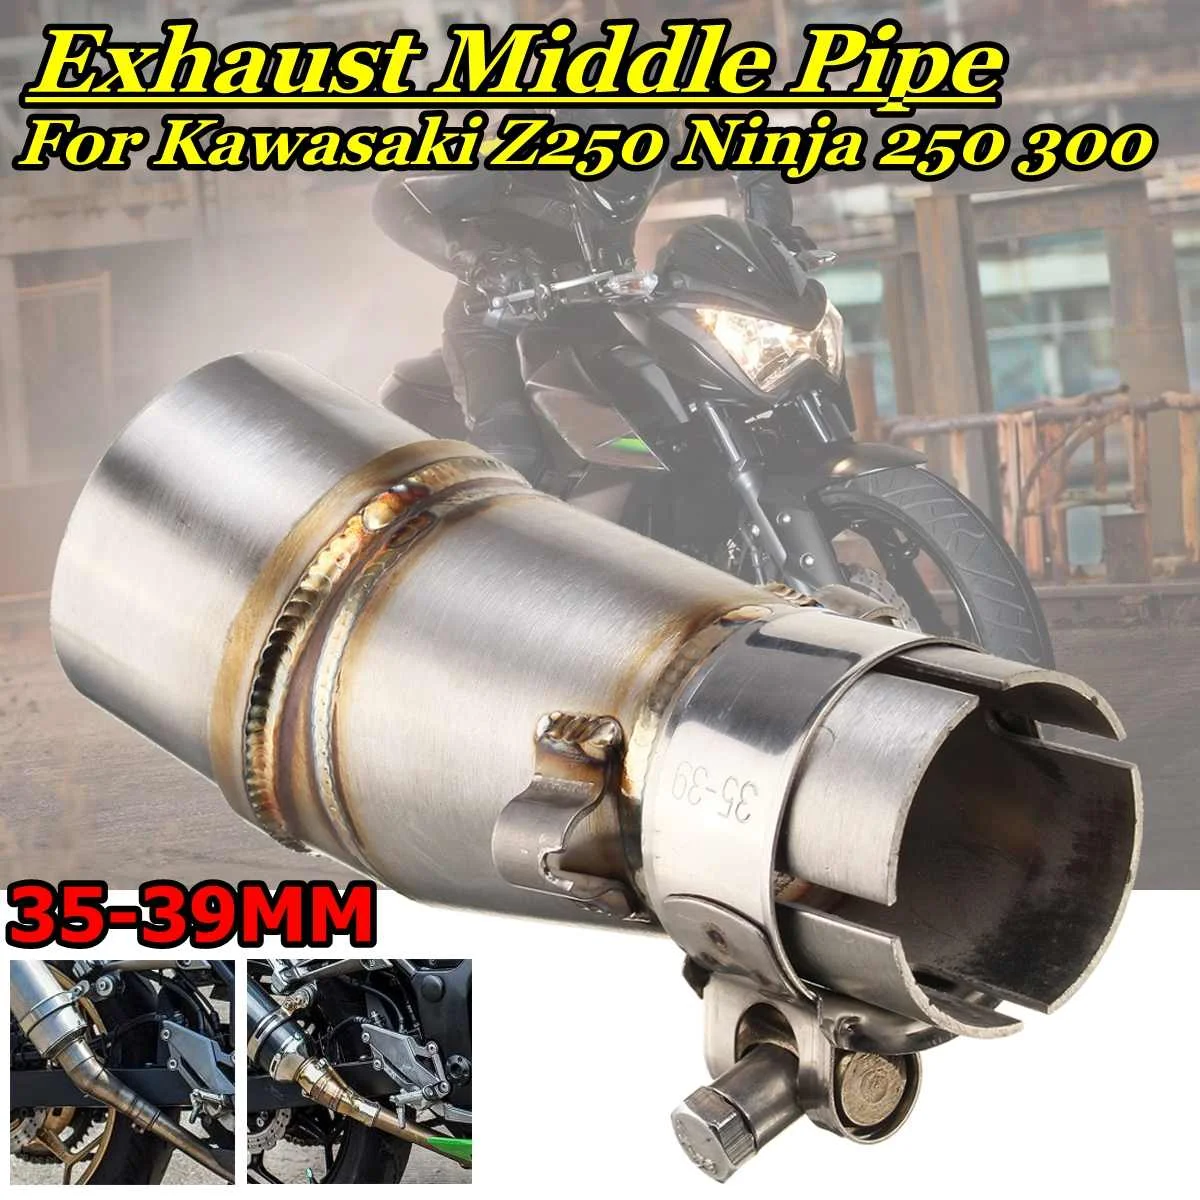 Z250/300 Motorcycle Exhaust Middle Pipe Link Muffler Mid Section Adapter Parts